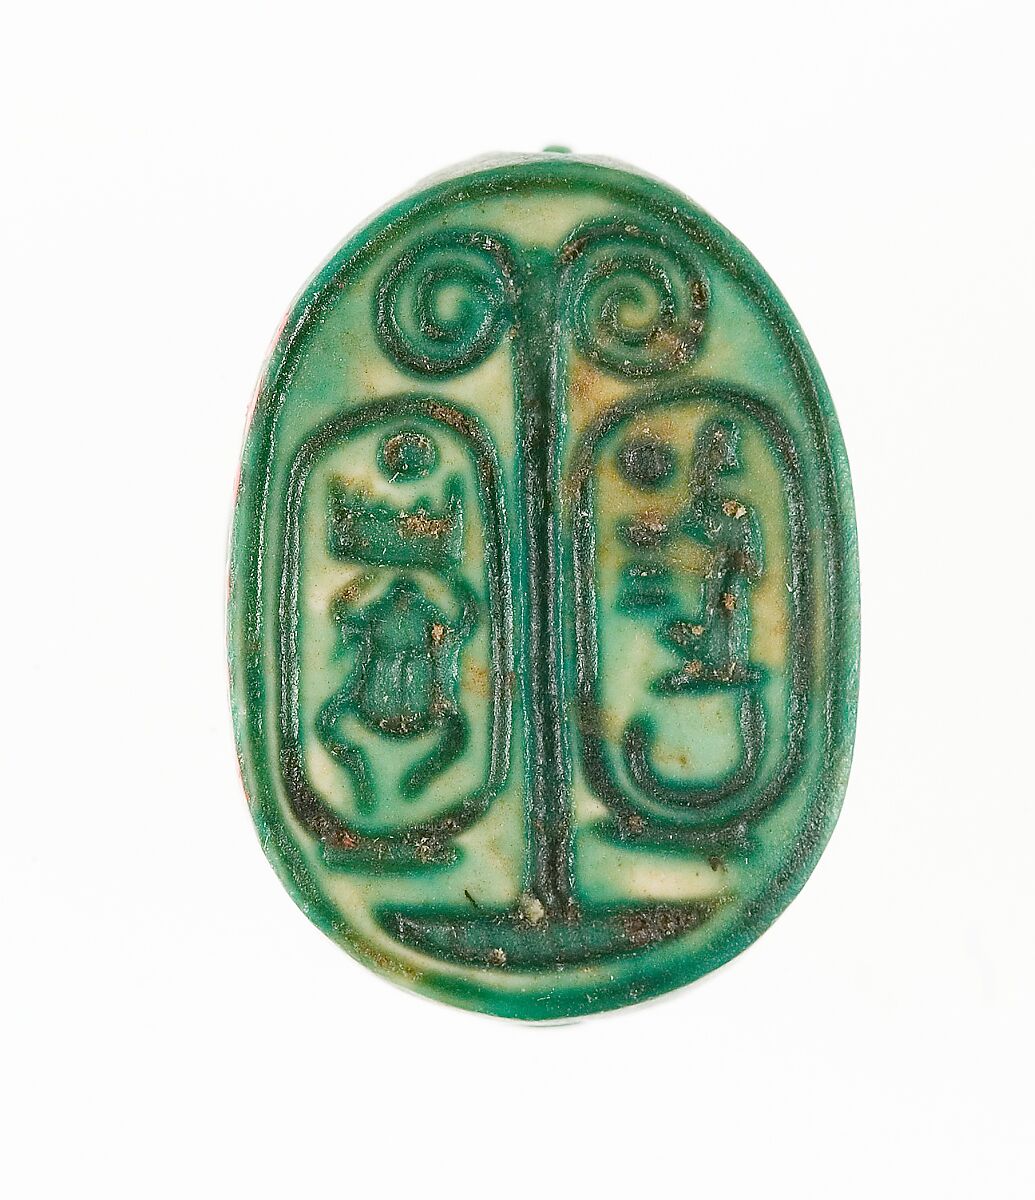 Scarab with the Throne Names of Thutmoses III and Hatshepsut, Steatite (glazed) 